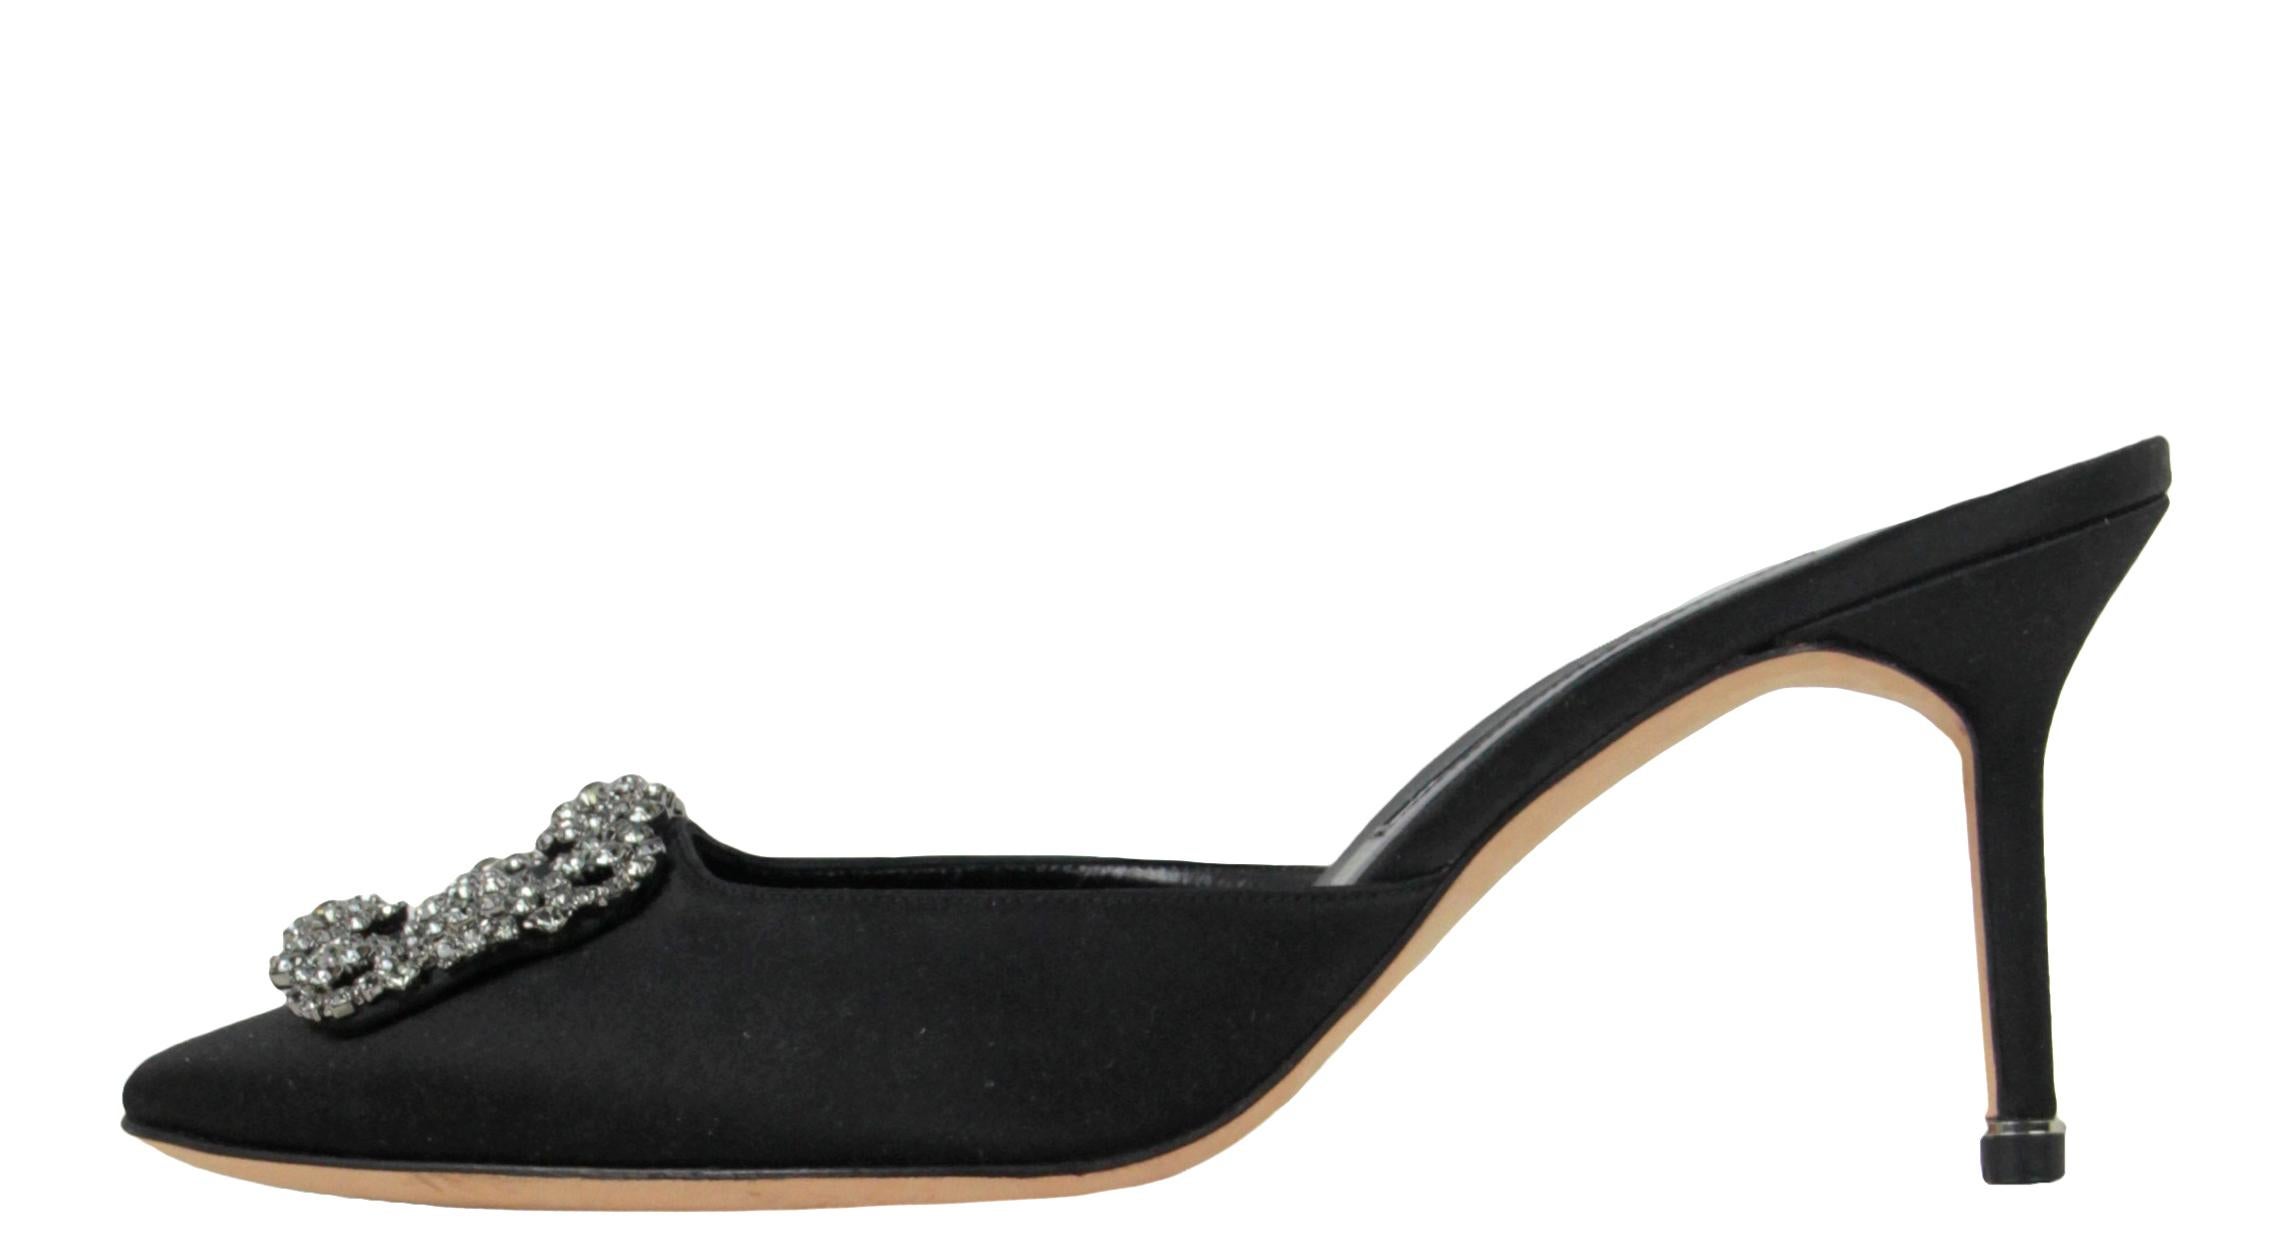 Manolo Blahnik Black Satin Hangisimu Satin Mule sz 39.5

Made In: Italy
Color: Navy
Hardware: Silvertone
Materials: Satin, metal, crystals
Closure/Opening: Slip on
Overall Condition: Like new. Does not include box or dustbags
Estimated Retail: